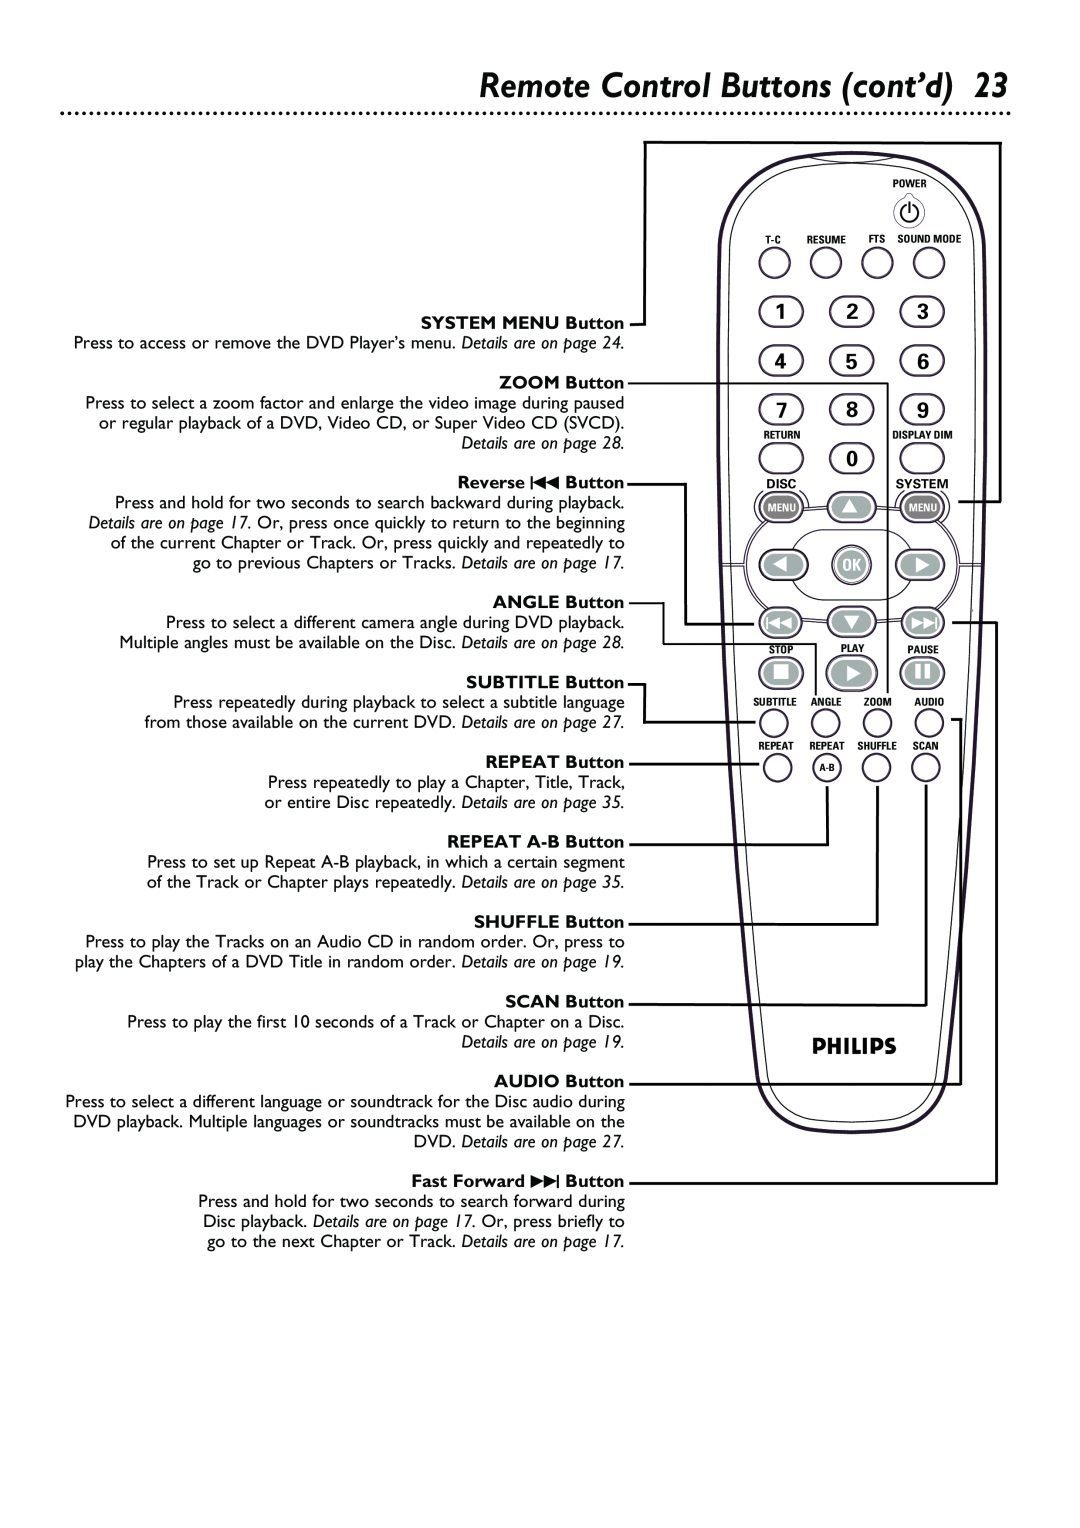 Philips DVD962SA owner manual Remote Control Buttons cont’d, DVD. Details are on page 